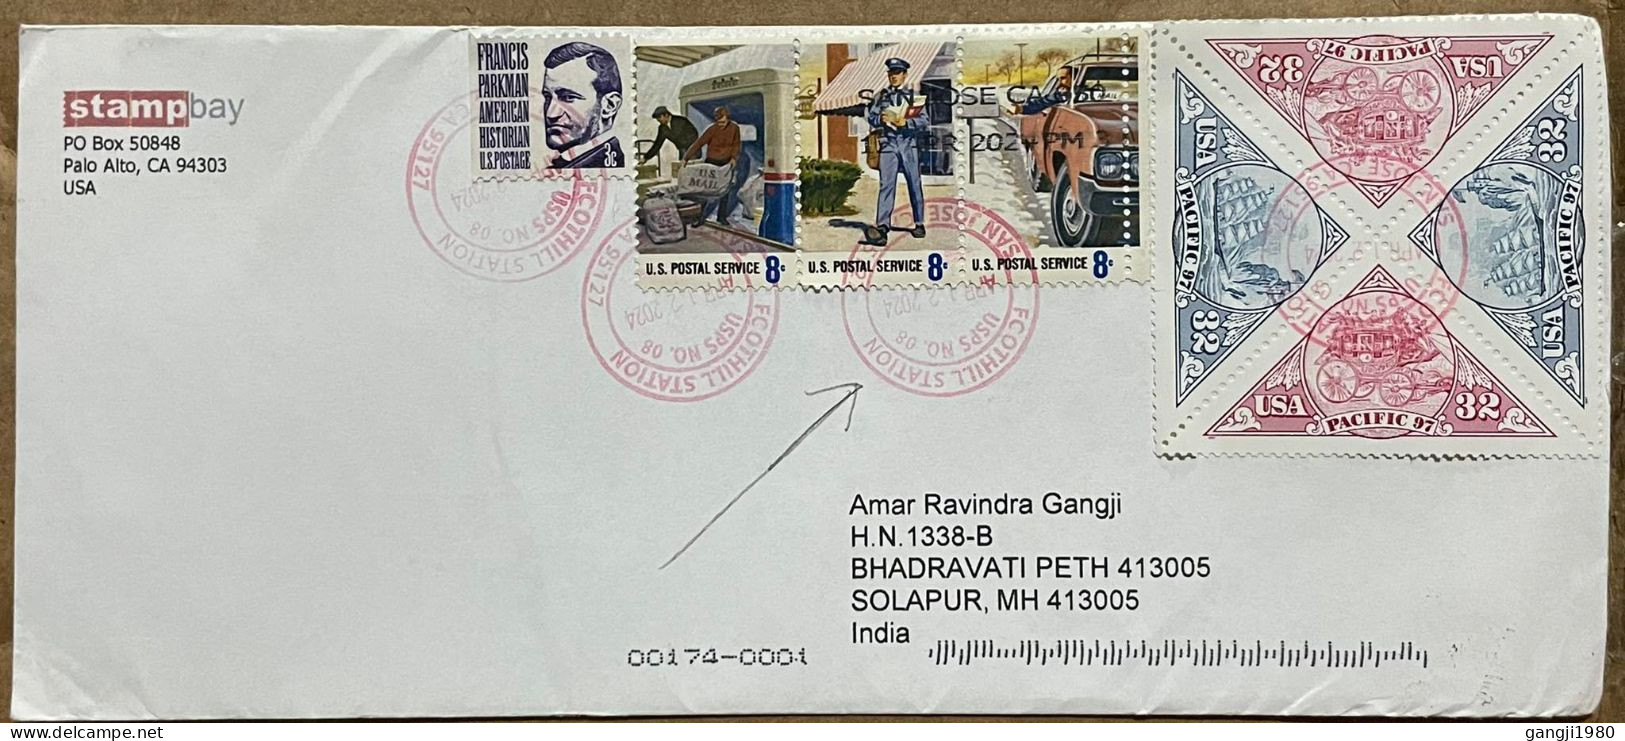 USA TO INDIA COVER USED 2024, ADVERTISING STAMP BAY, POSTMAN, PACIFIC 97 TANGLE STAMP, 8 STAMP, FOOTHILL STATION CITY CA - Briefe U. Dokumente